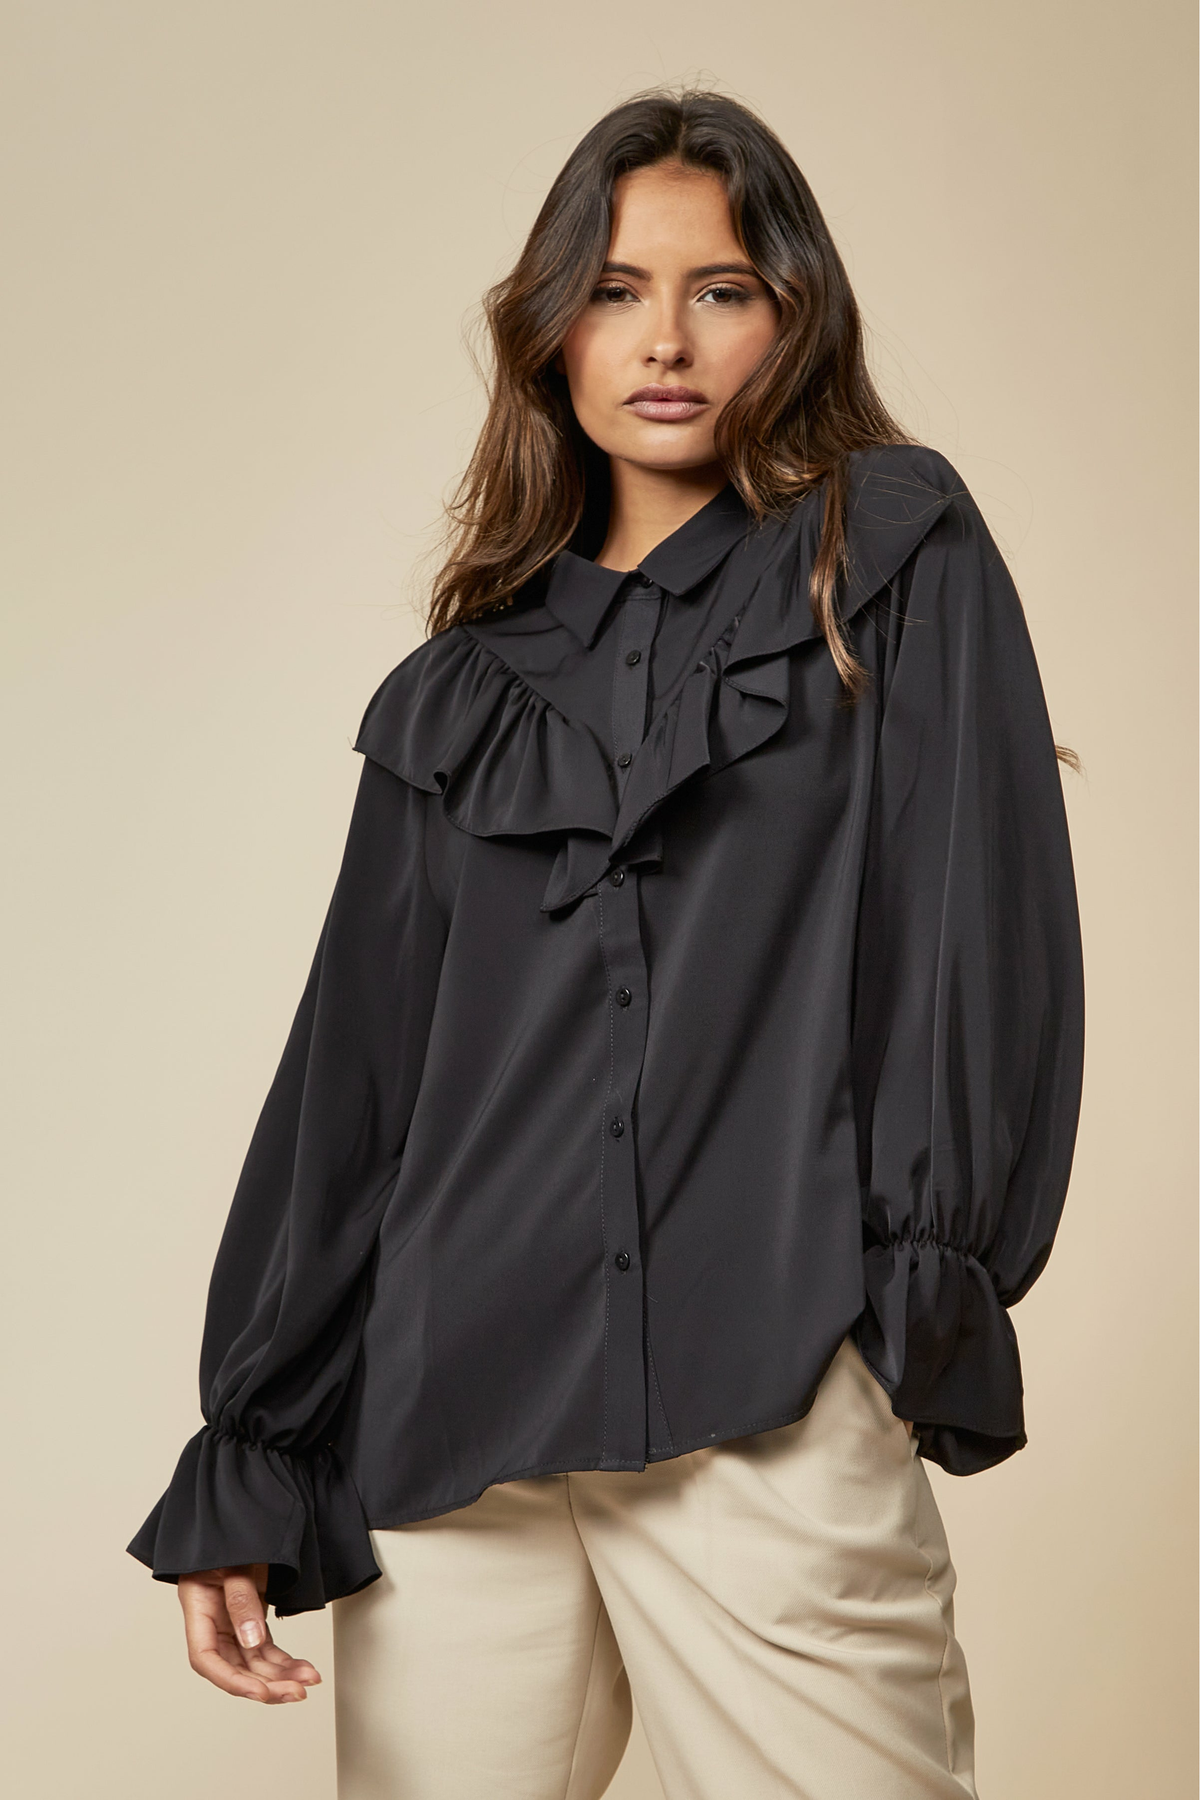 Ruffle Detailed Front with Ruffle Sleeves Shirt in Black GLR FASHION NETWORKING